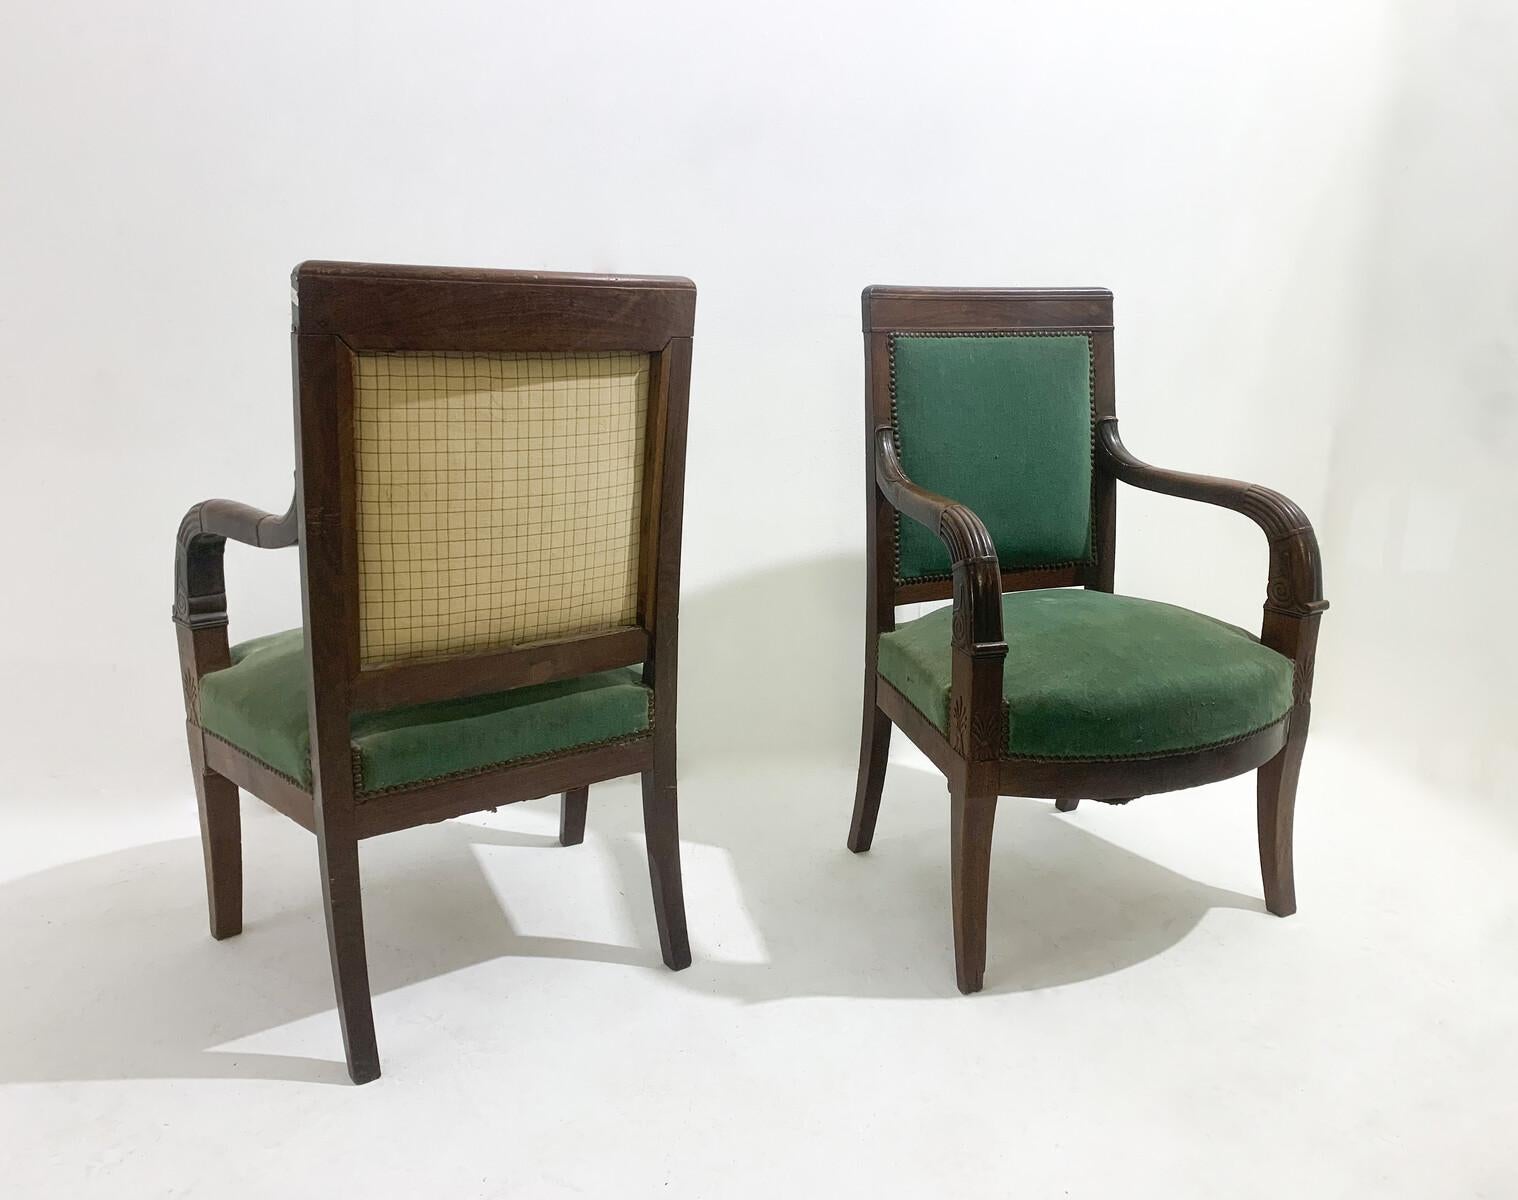 Pair of Green Armchairs, Empire, Mahogany, 19th Century In Good Condition For Sale In Brussels, BE